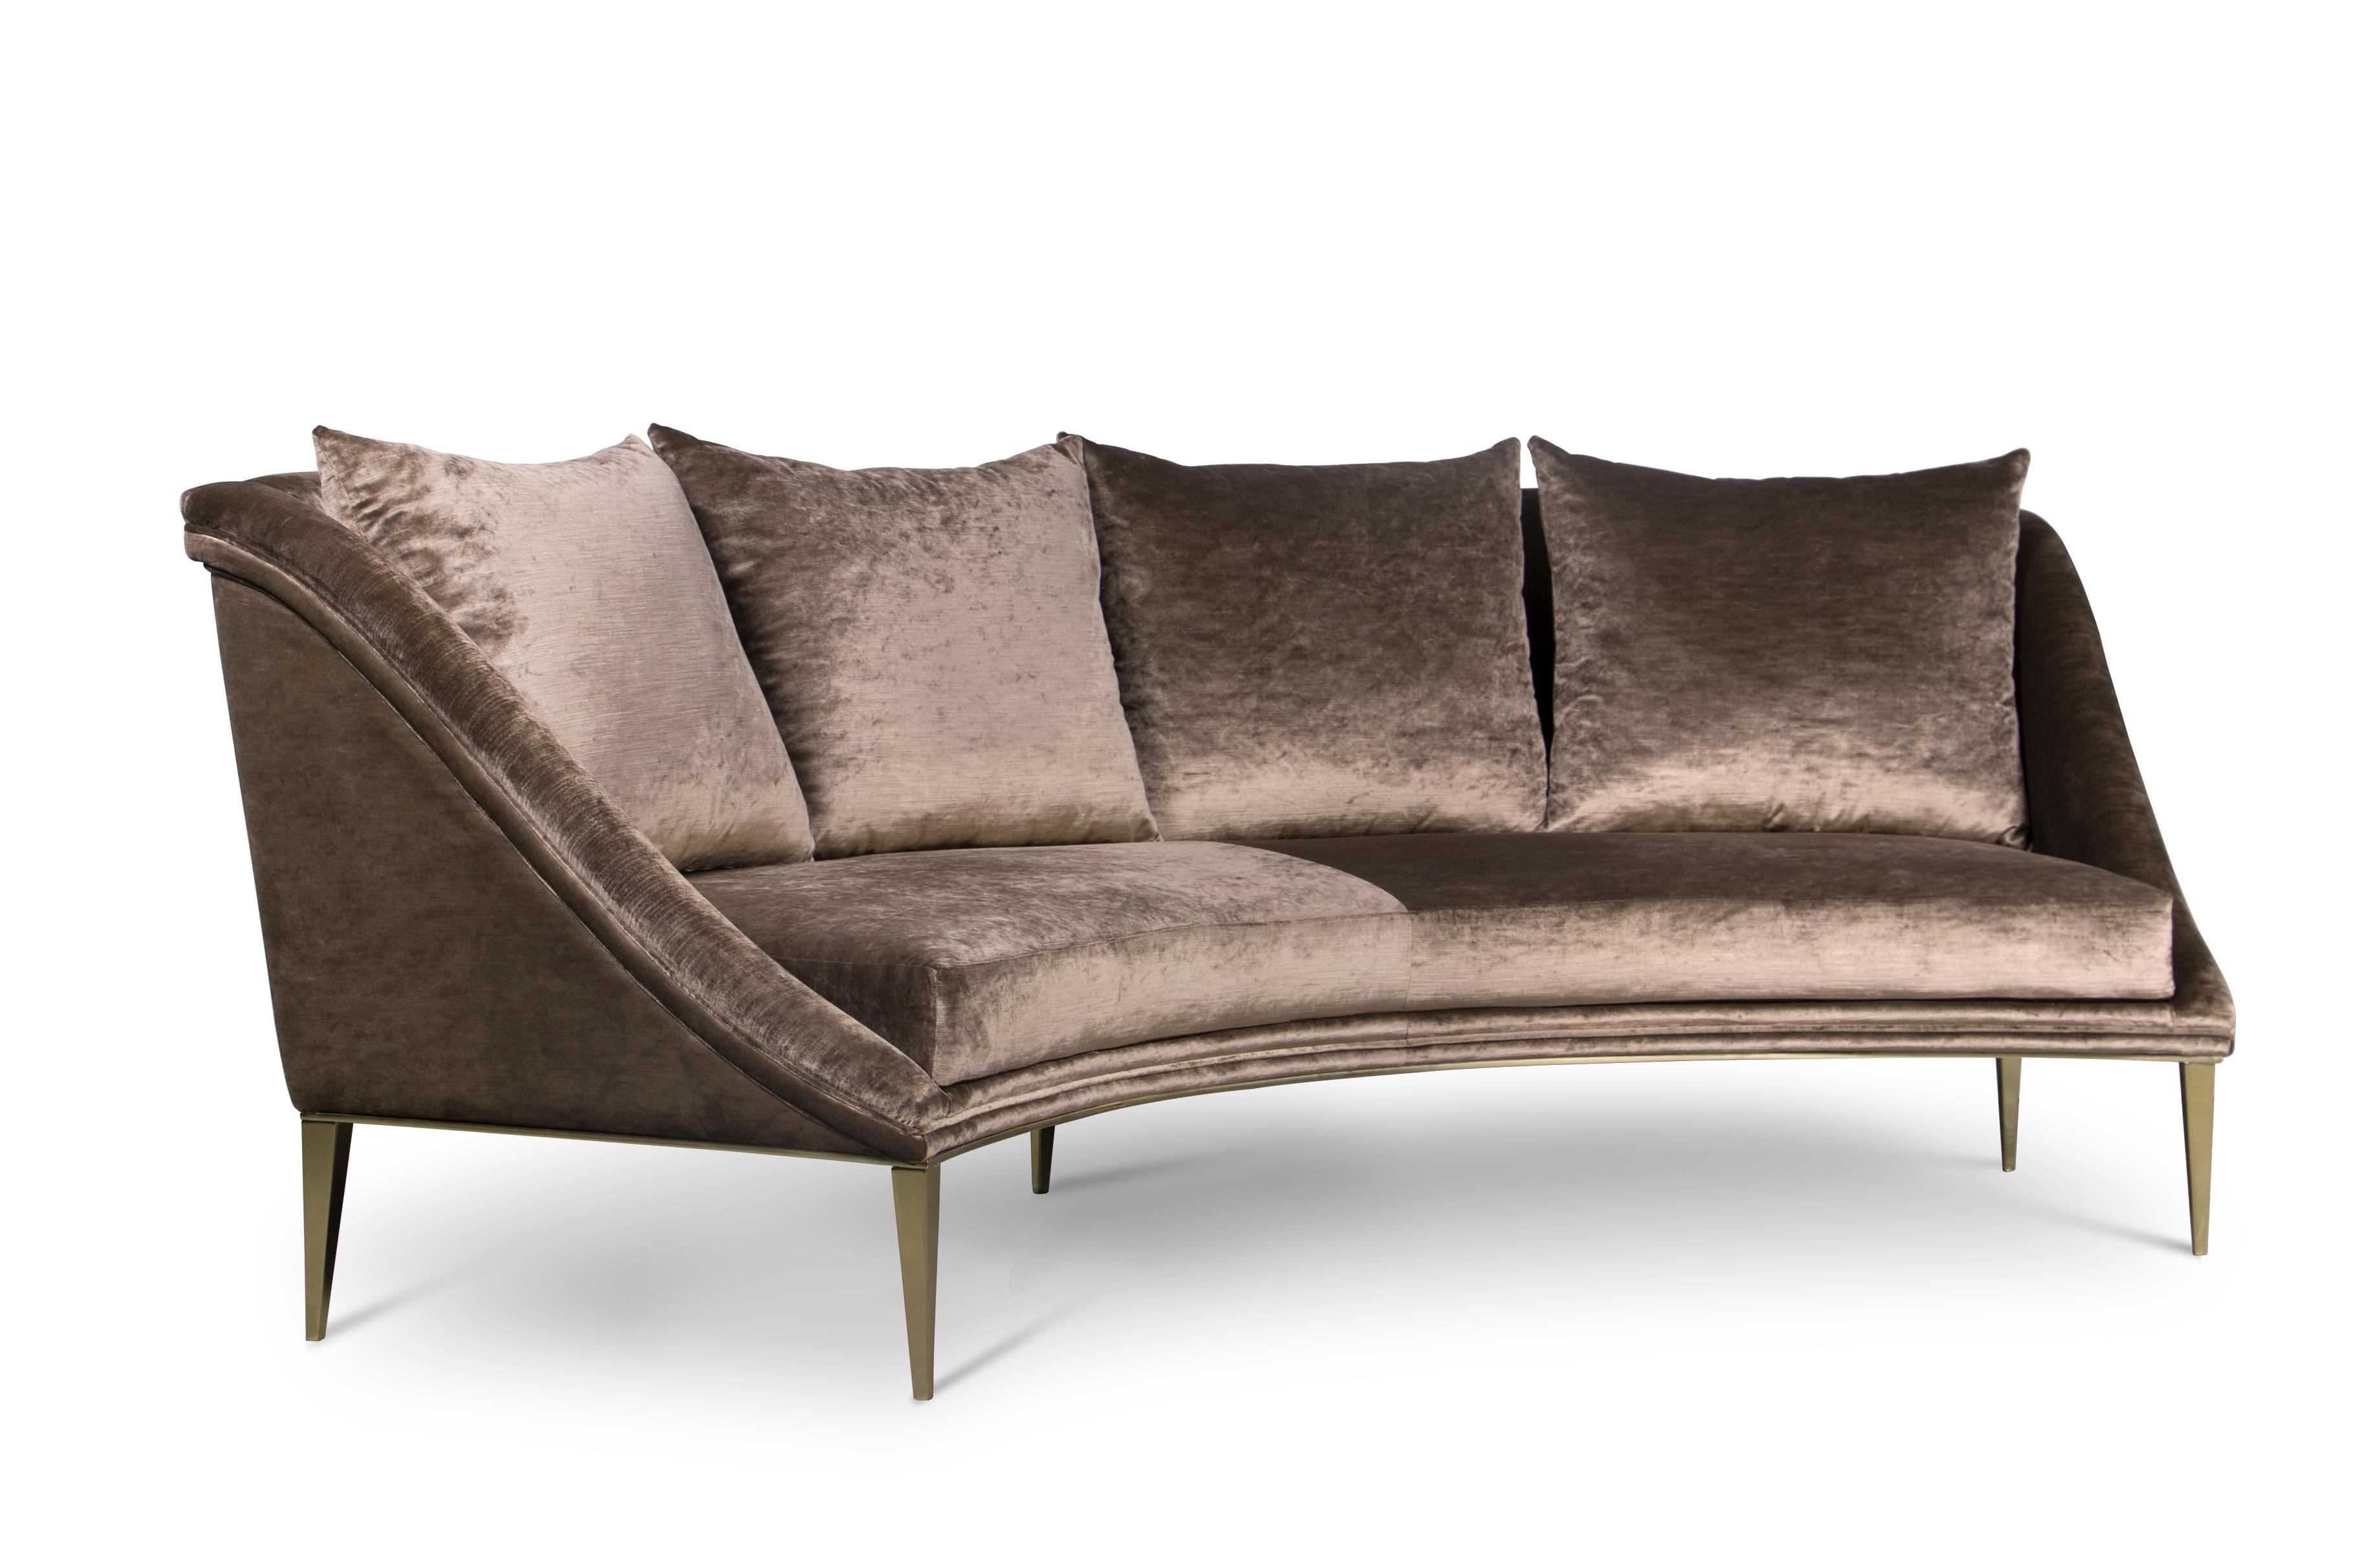 Designed to perform in a matter that indulges the eyes, the Geisha‘s curves grace a room with the extravagance and poise of a Kyoto Geisha. Her fully upholstered curved body rests on modern and sleek.

Options:
Upholstery: Available in any fabric